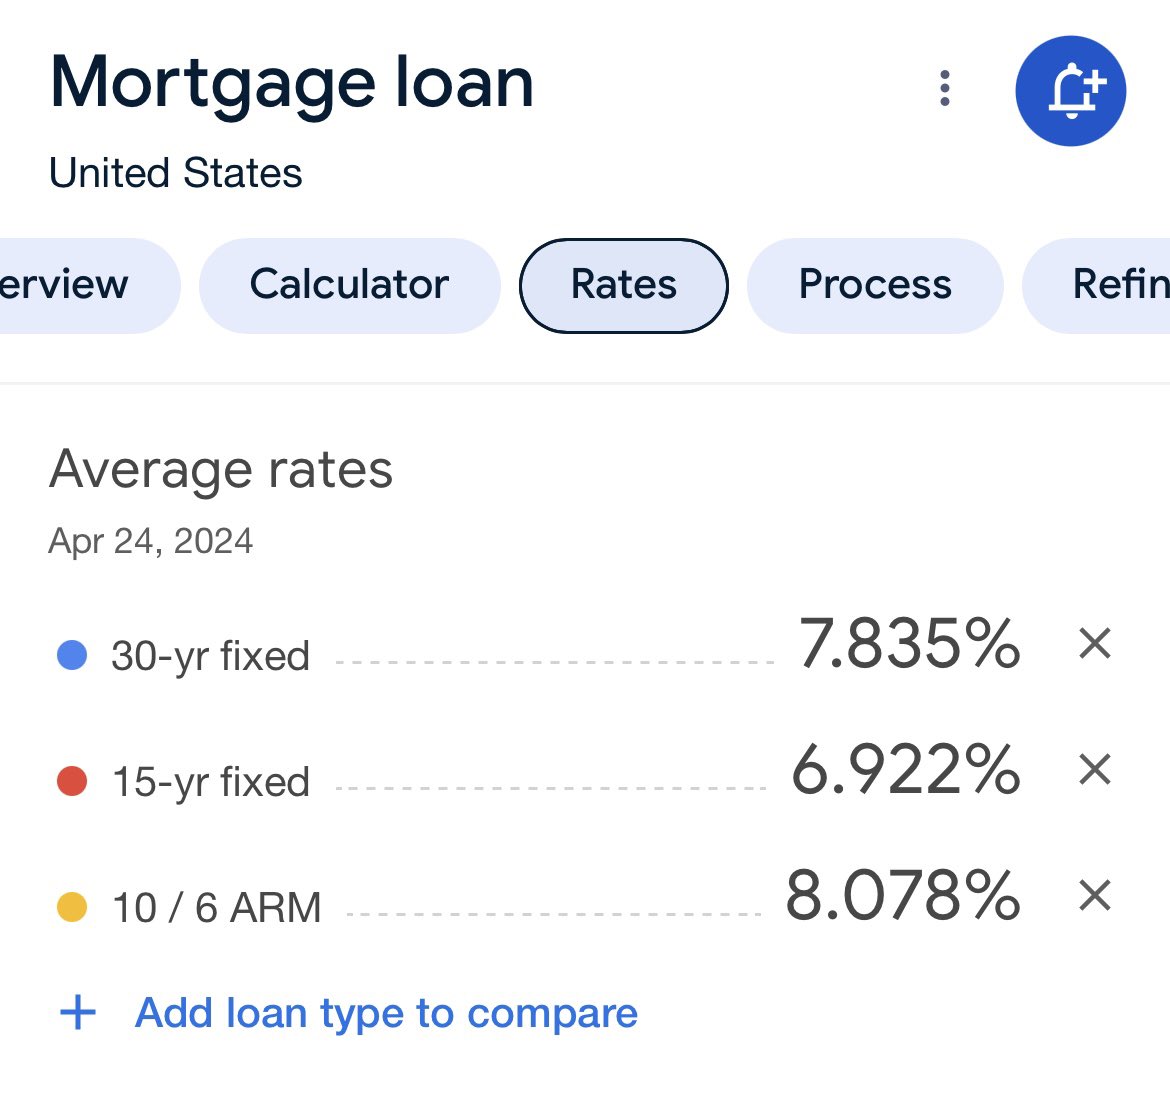 Mortgage rates just hit a new high for 2024. Gen Z will be the first generation of perpetual renters. And it’s no fault of their own. Their government screwed them. Look at what happened to JFK. He wanted to audit the FED… And no, Trump won’t change anything.